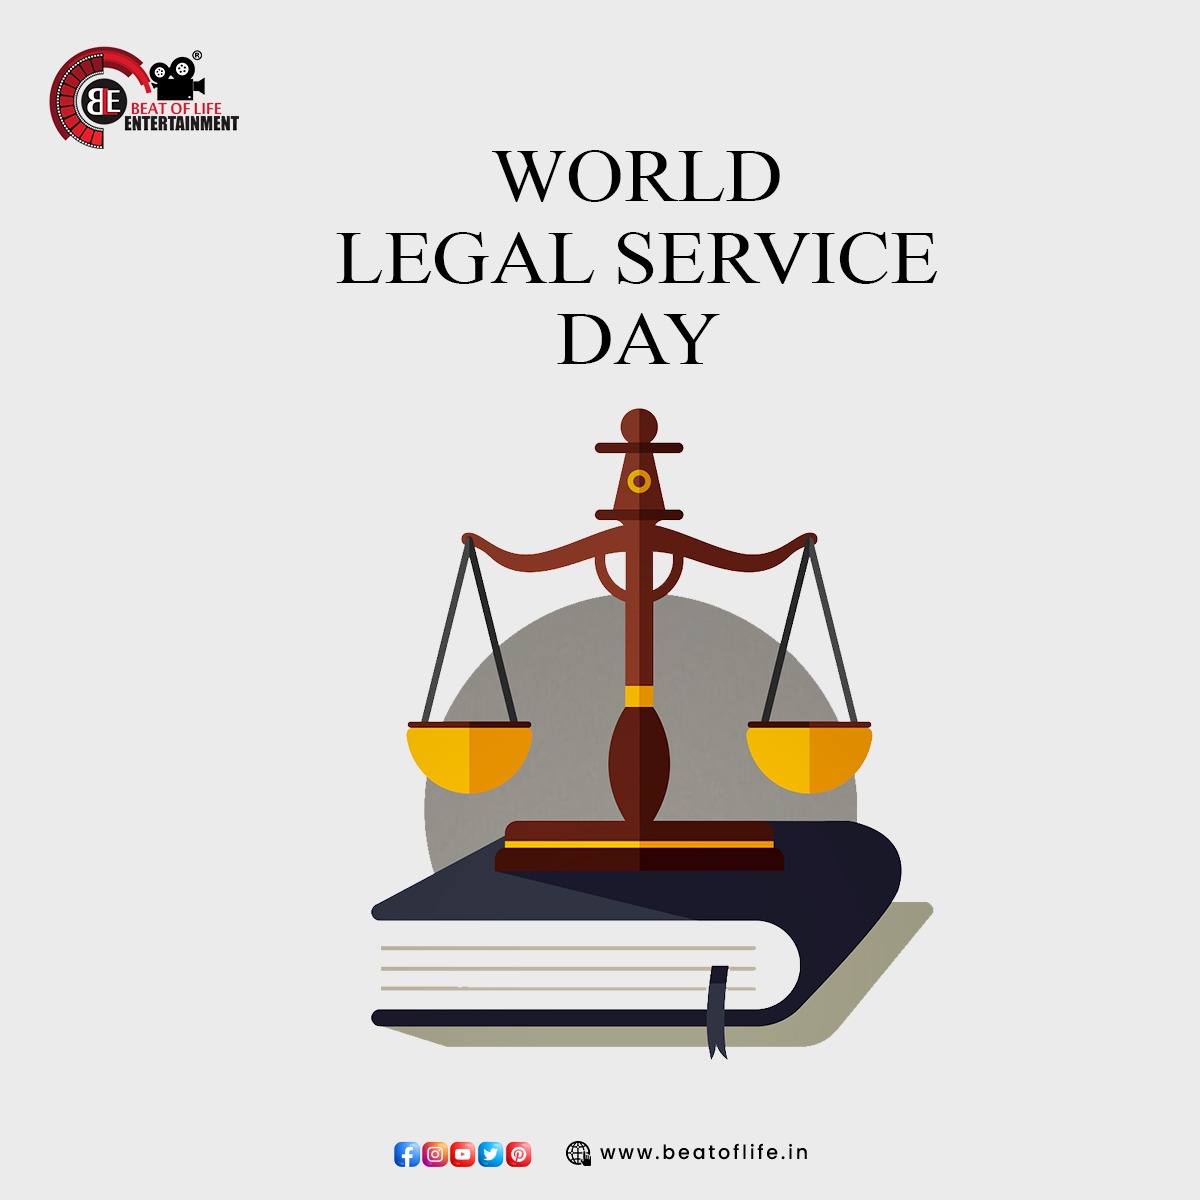 World Legal Service Day